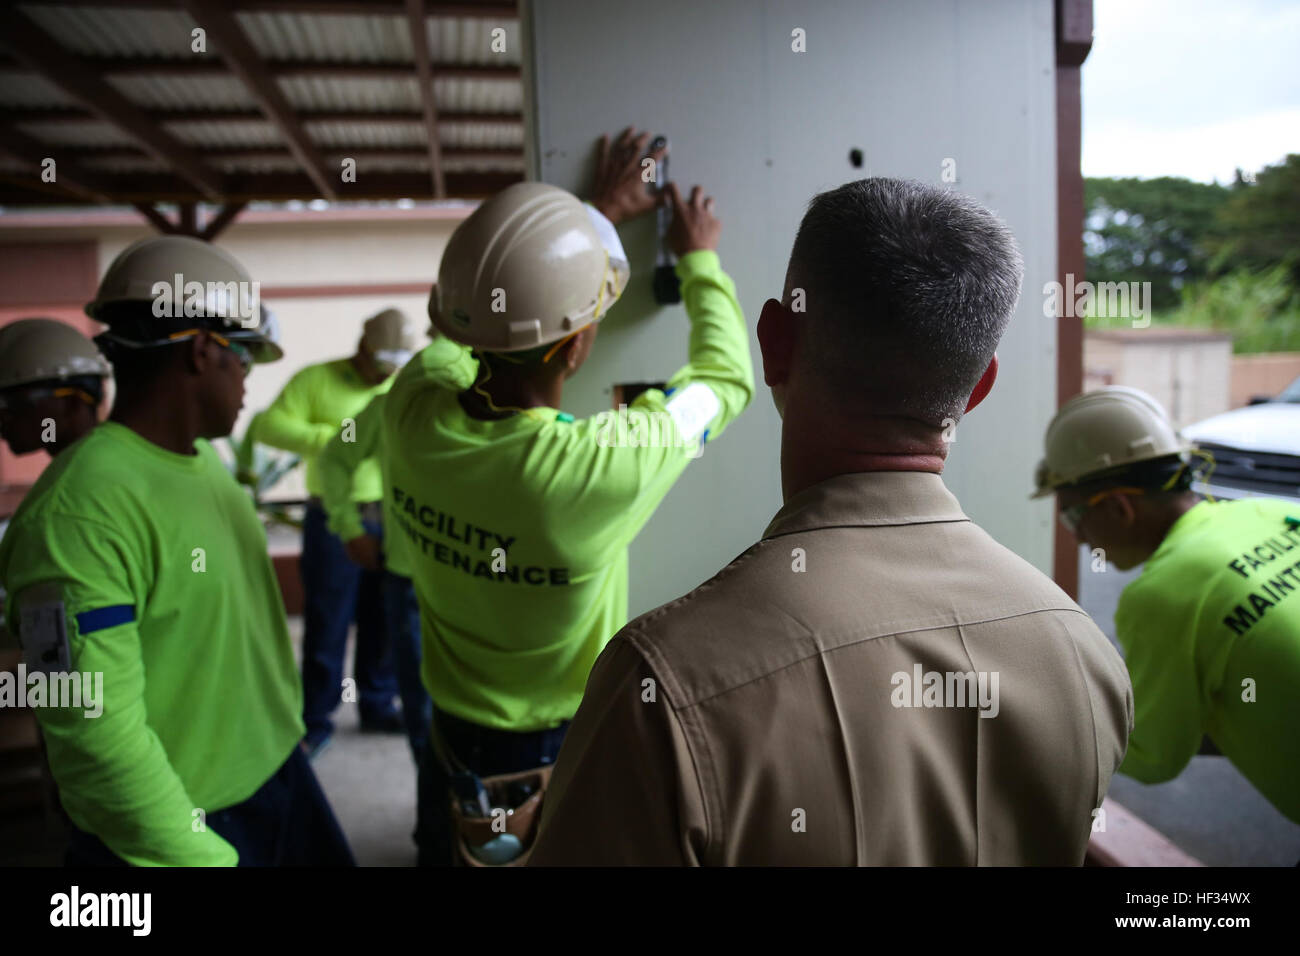 Representatives from Marine Corps Base Hawaii watch as students in the Job Corps program practice filling and covering holes in drywall March 24, 2015, aboard the Job Corps Center in Waimanalo. The center in Waimanalo offers nine career field opportunities for their students, ranging from culinary arts to facilities maintenance or nursing assistance, and all of the programs are aligned to national training and certification standards. (U.S. Marine Corps photo by Lance Cpl. Harley Thomas/released) Hawaii Job Corps pushes students toward summit 150324-M-SB674-179 Stock Photo